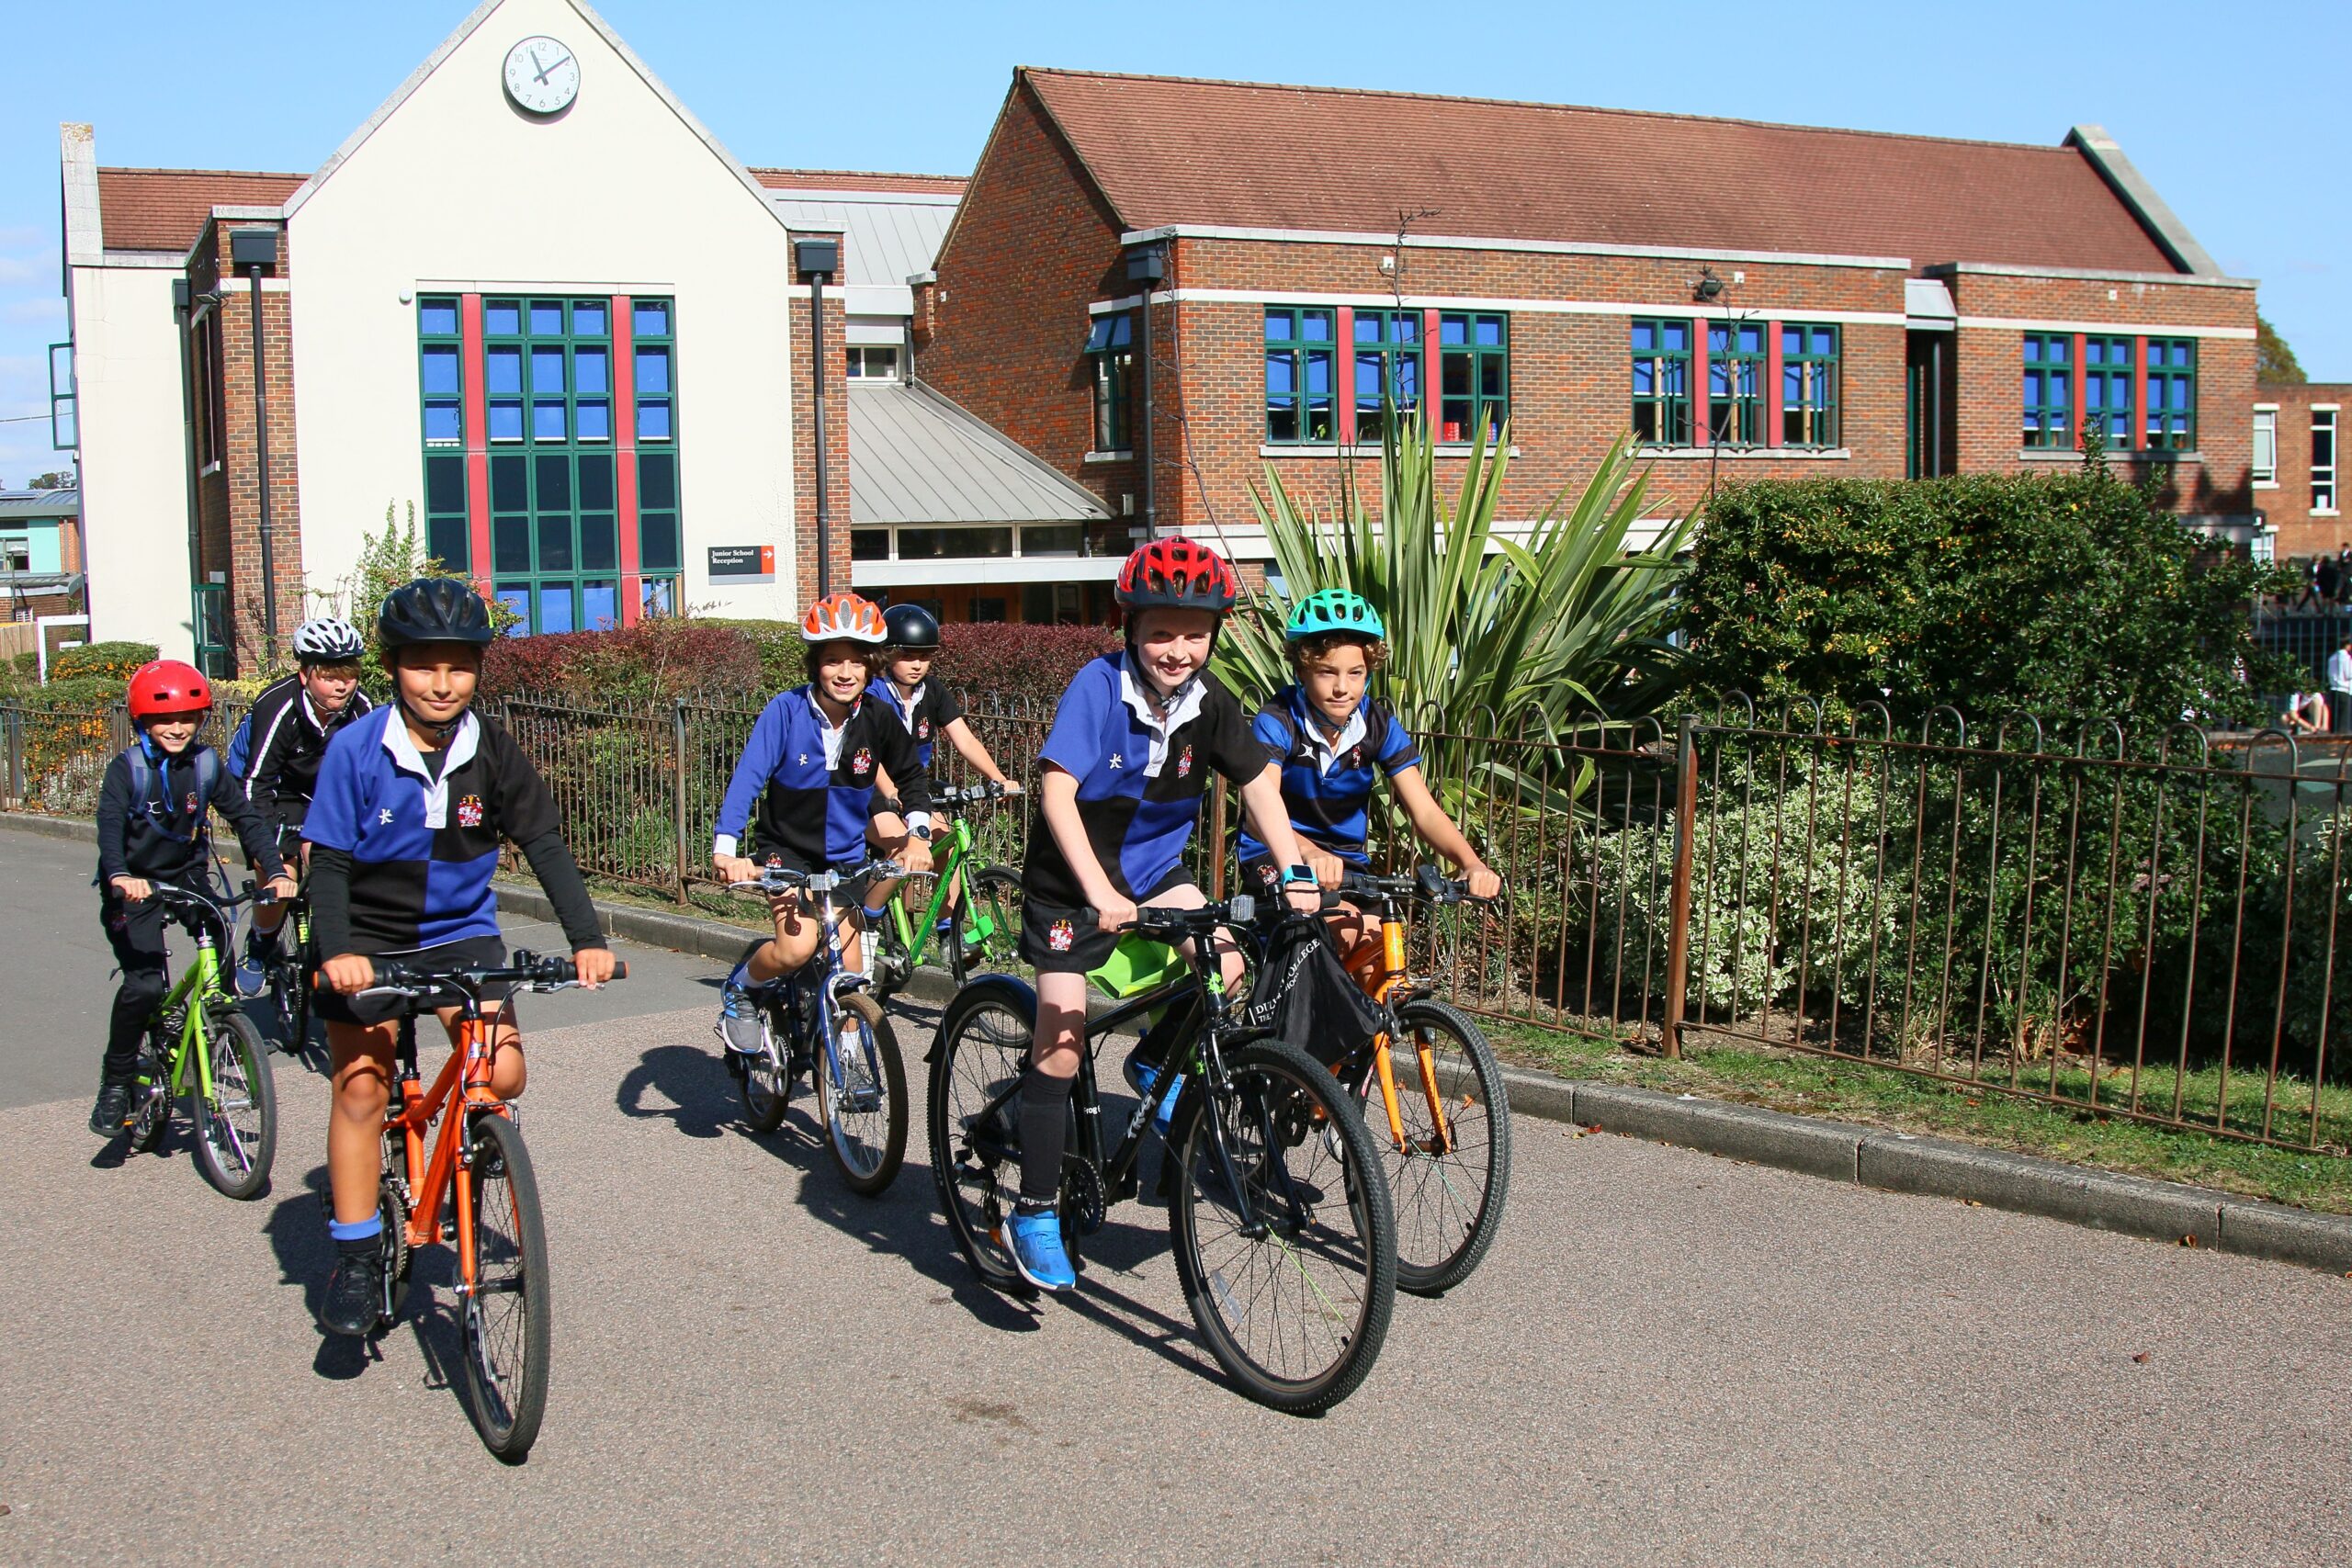 Dulwich pupils cycle thousands of miles every day to get to school